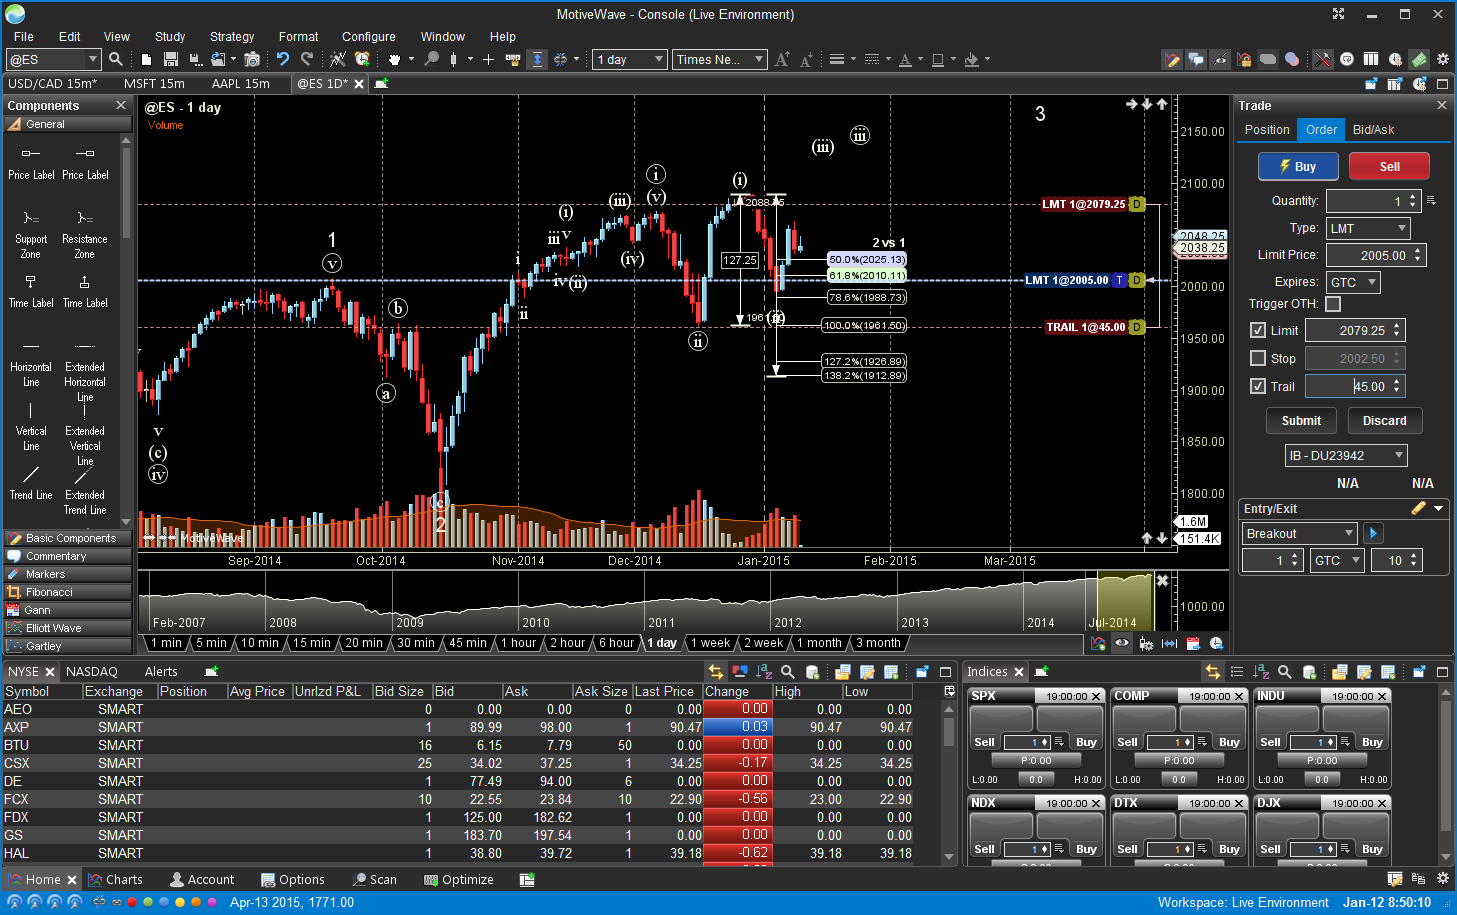 Forex and stock trading platform